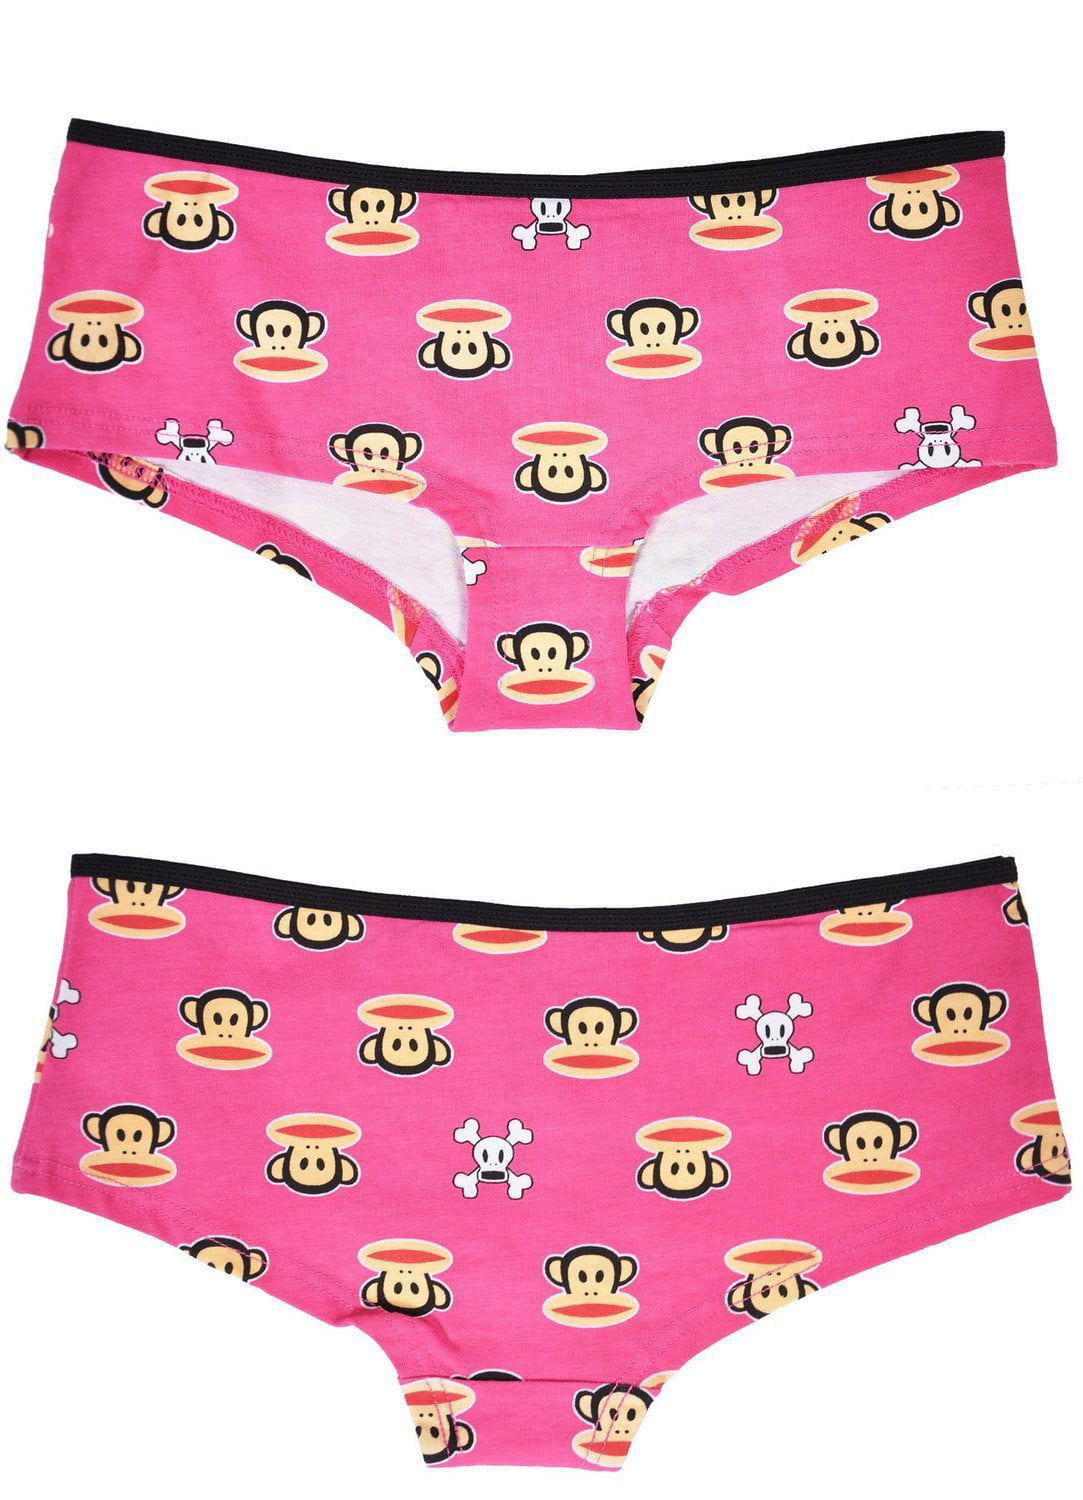 Paul Frank Womens Cheeky Allover Printed Panty 